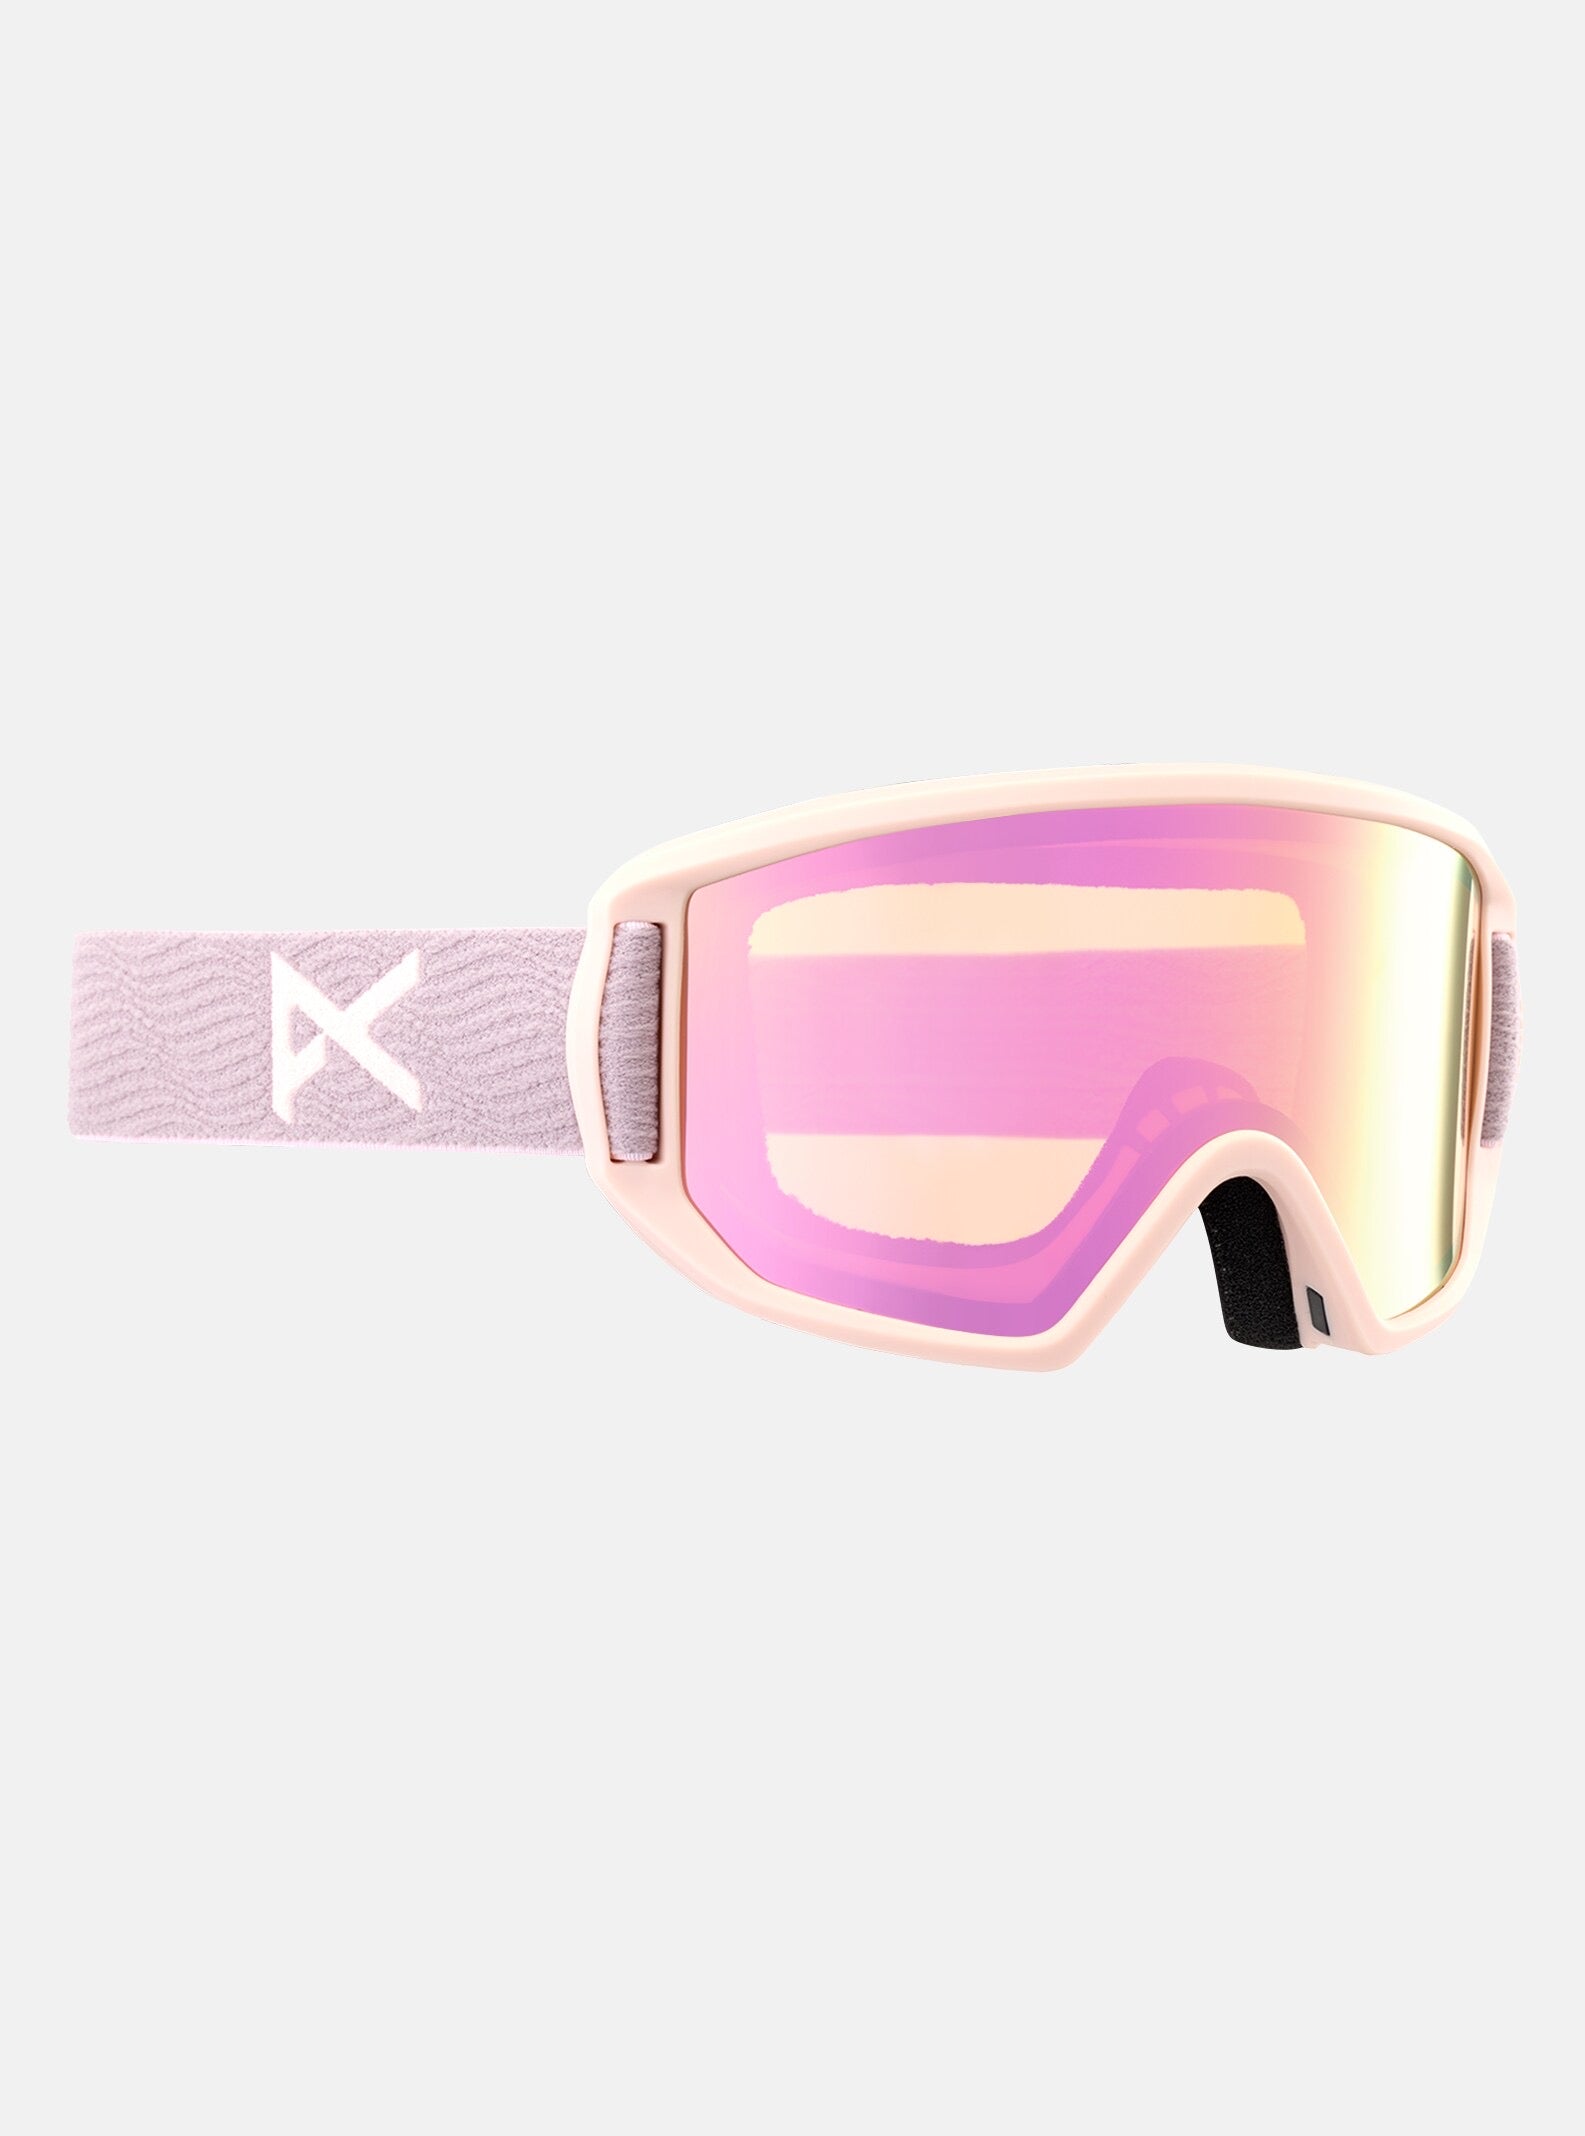 Relapse Jr. Goggles